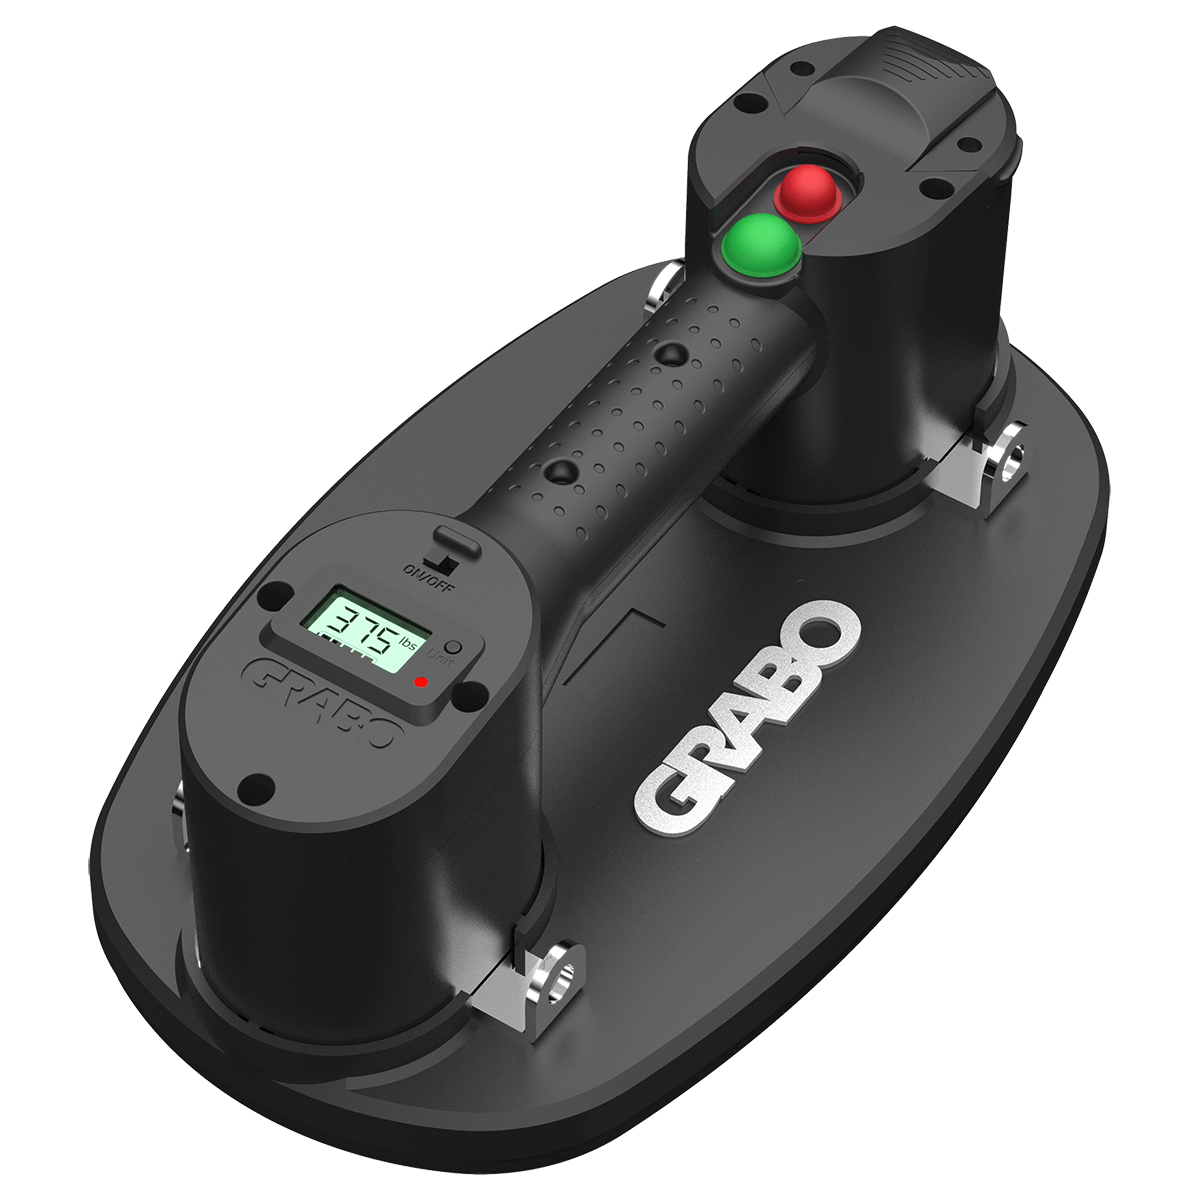 Grabo Pro-Lifter 20, Grabo Suction Cup